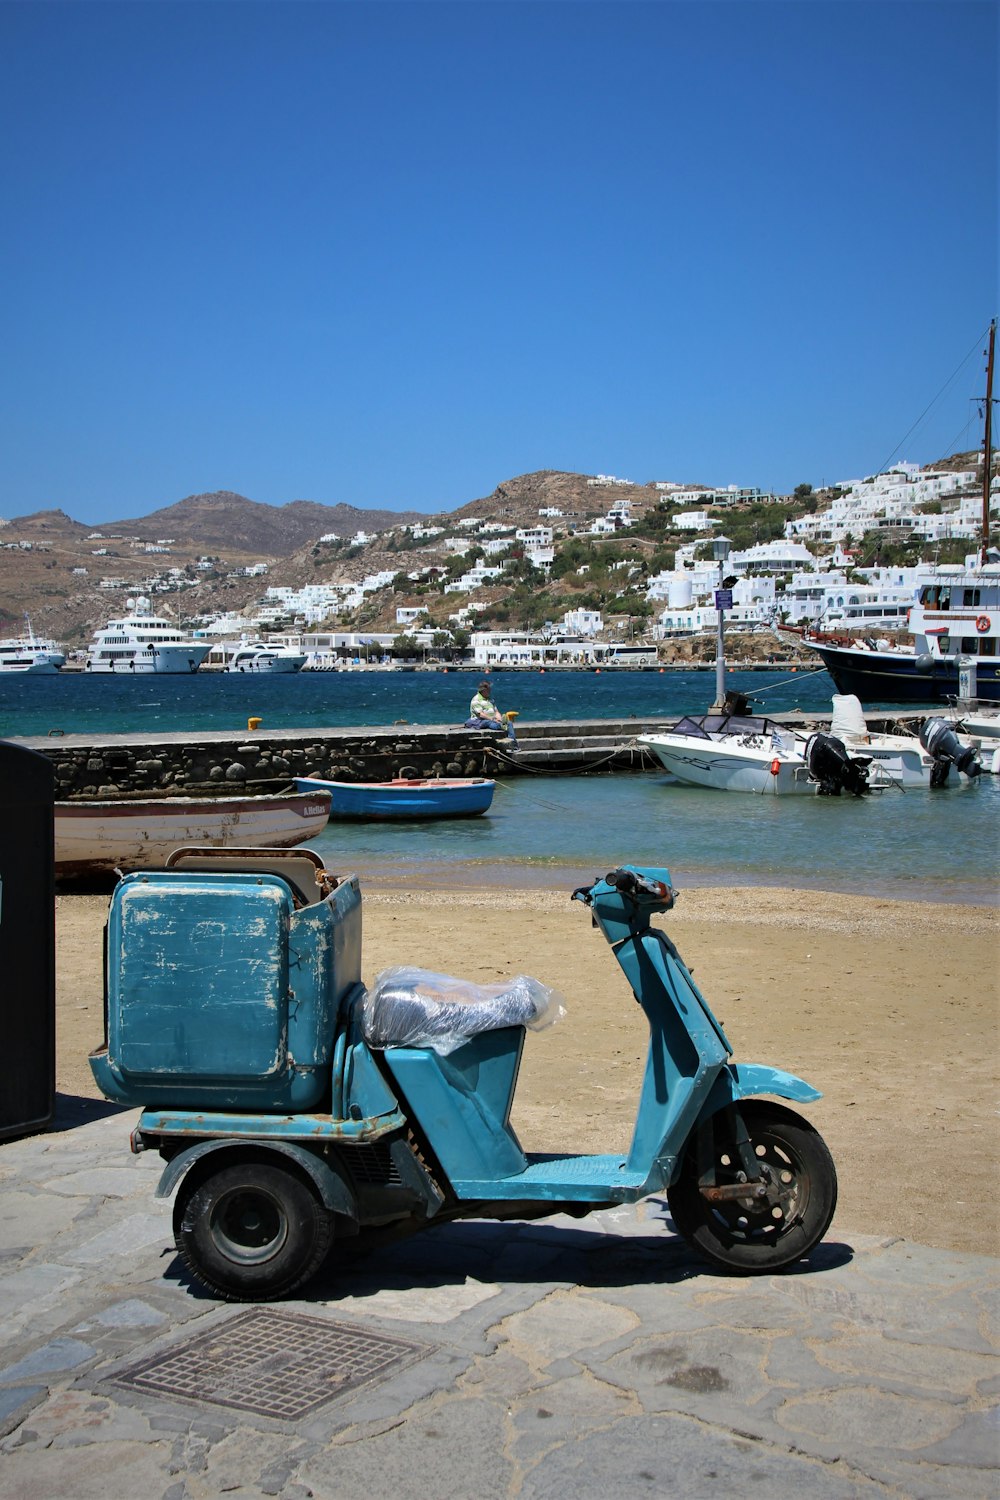 blue and black motor scooter parked near body of water during daytime photo  – Free Mýkonos Image on Unsplash